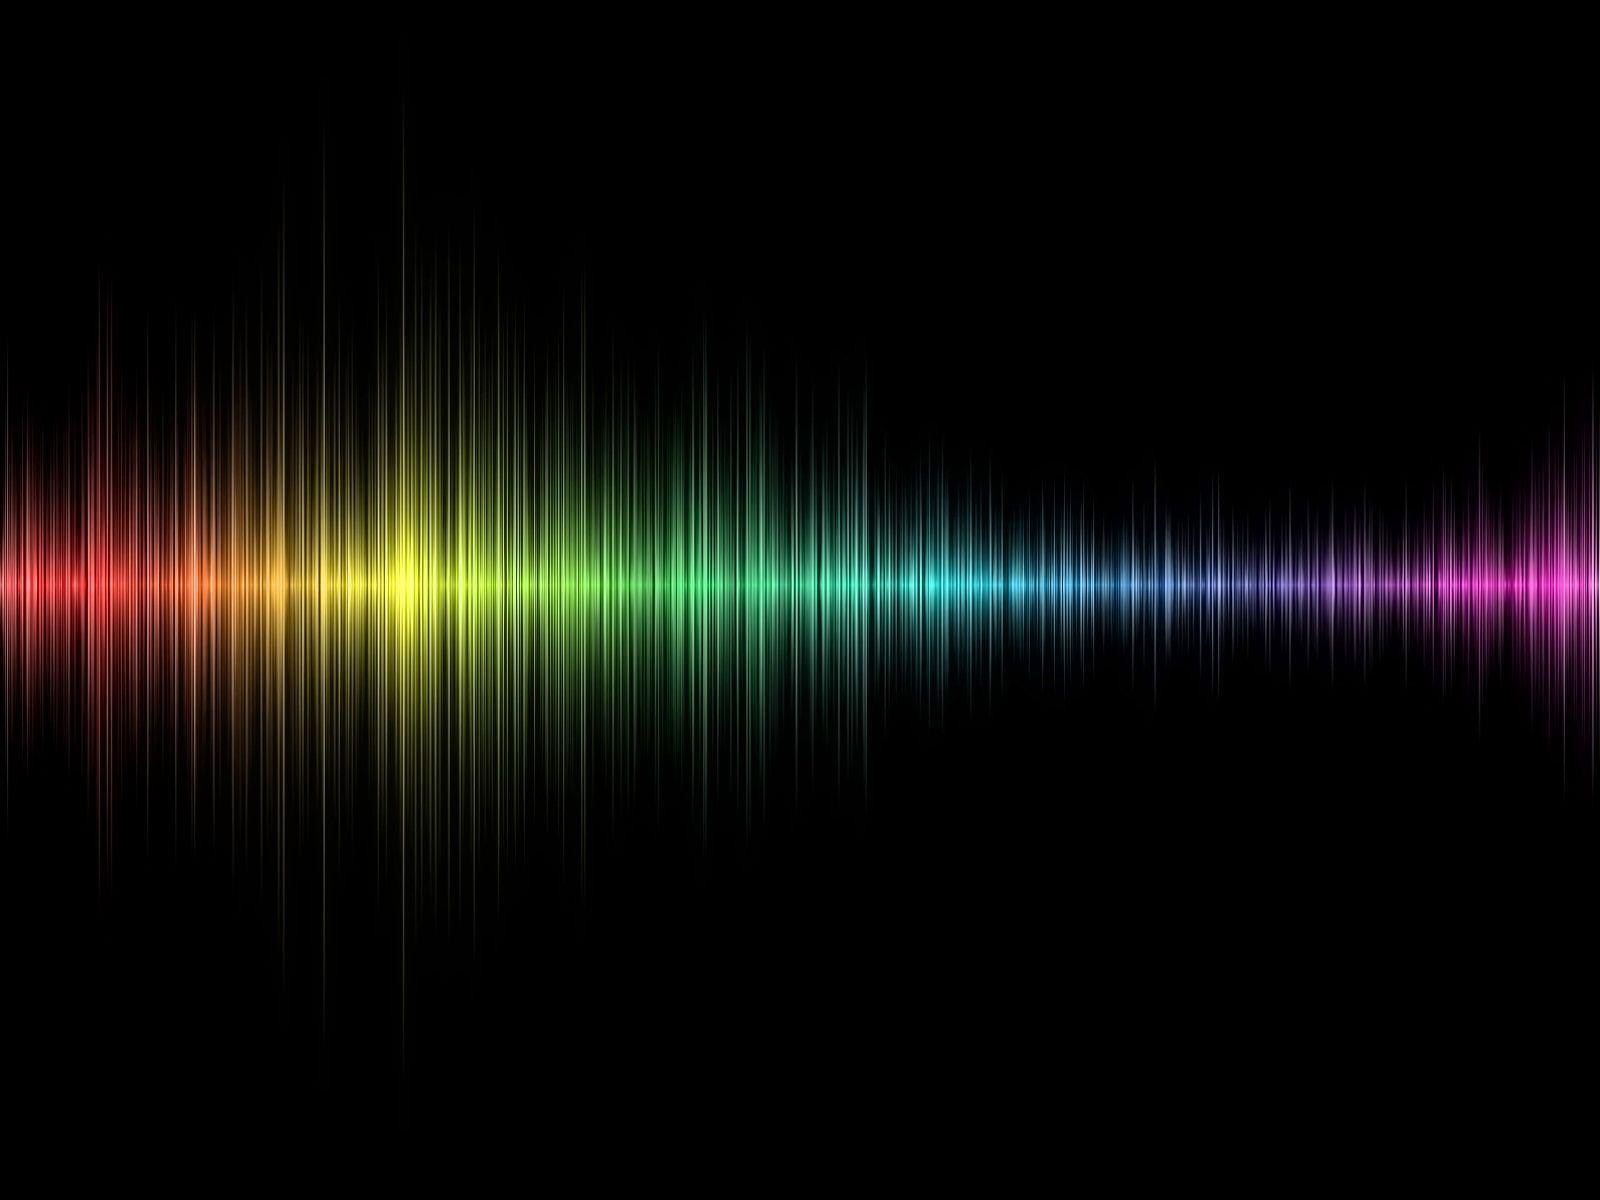 Wallpaper For > Cool Sound Waves Wallpaper. Music Waves & more w